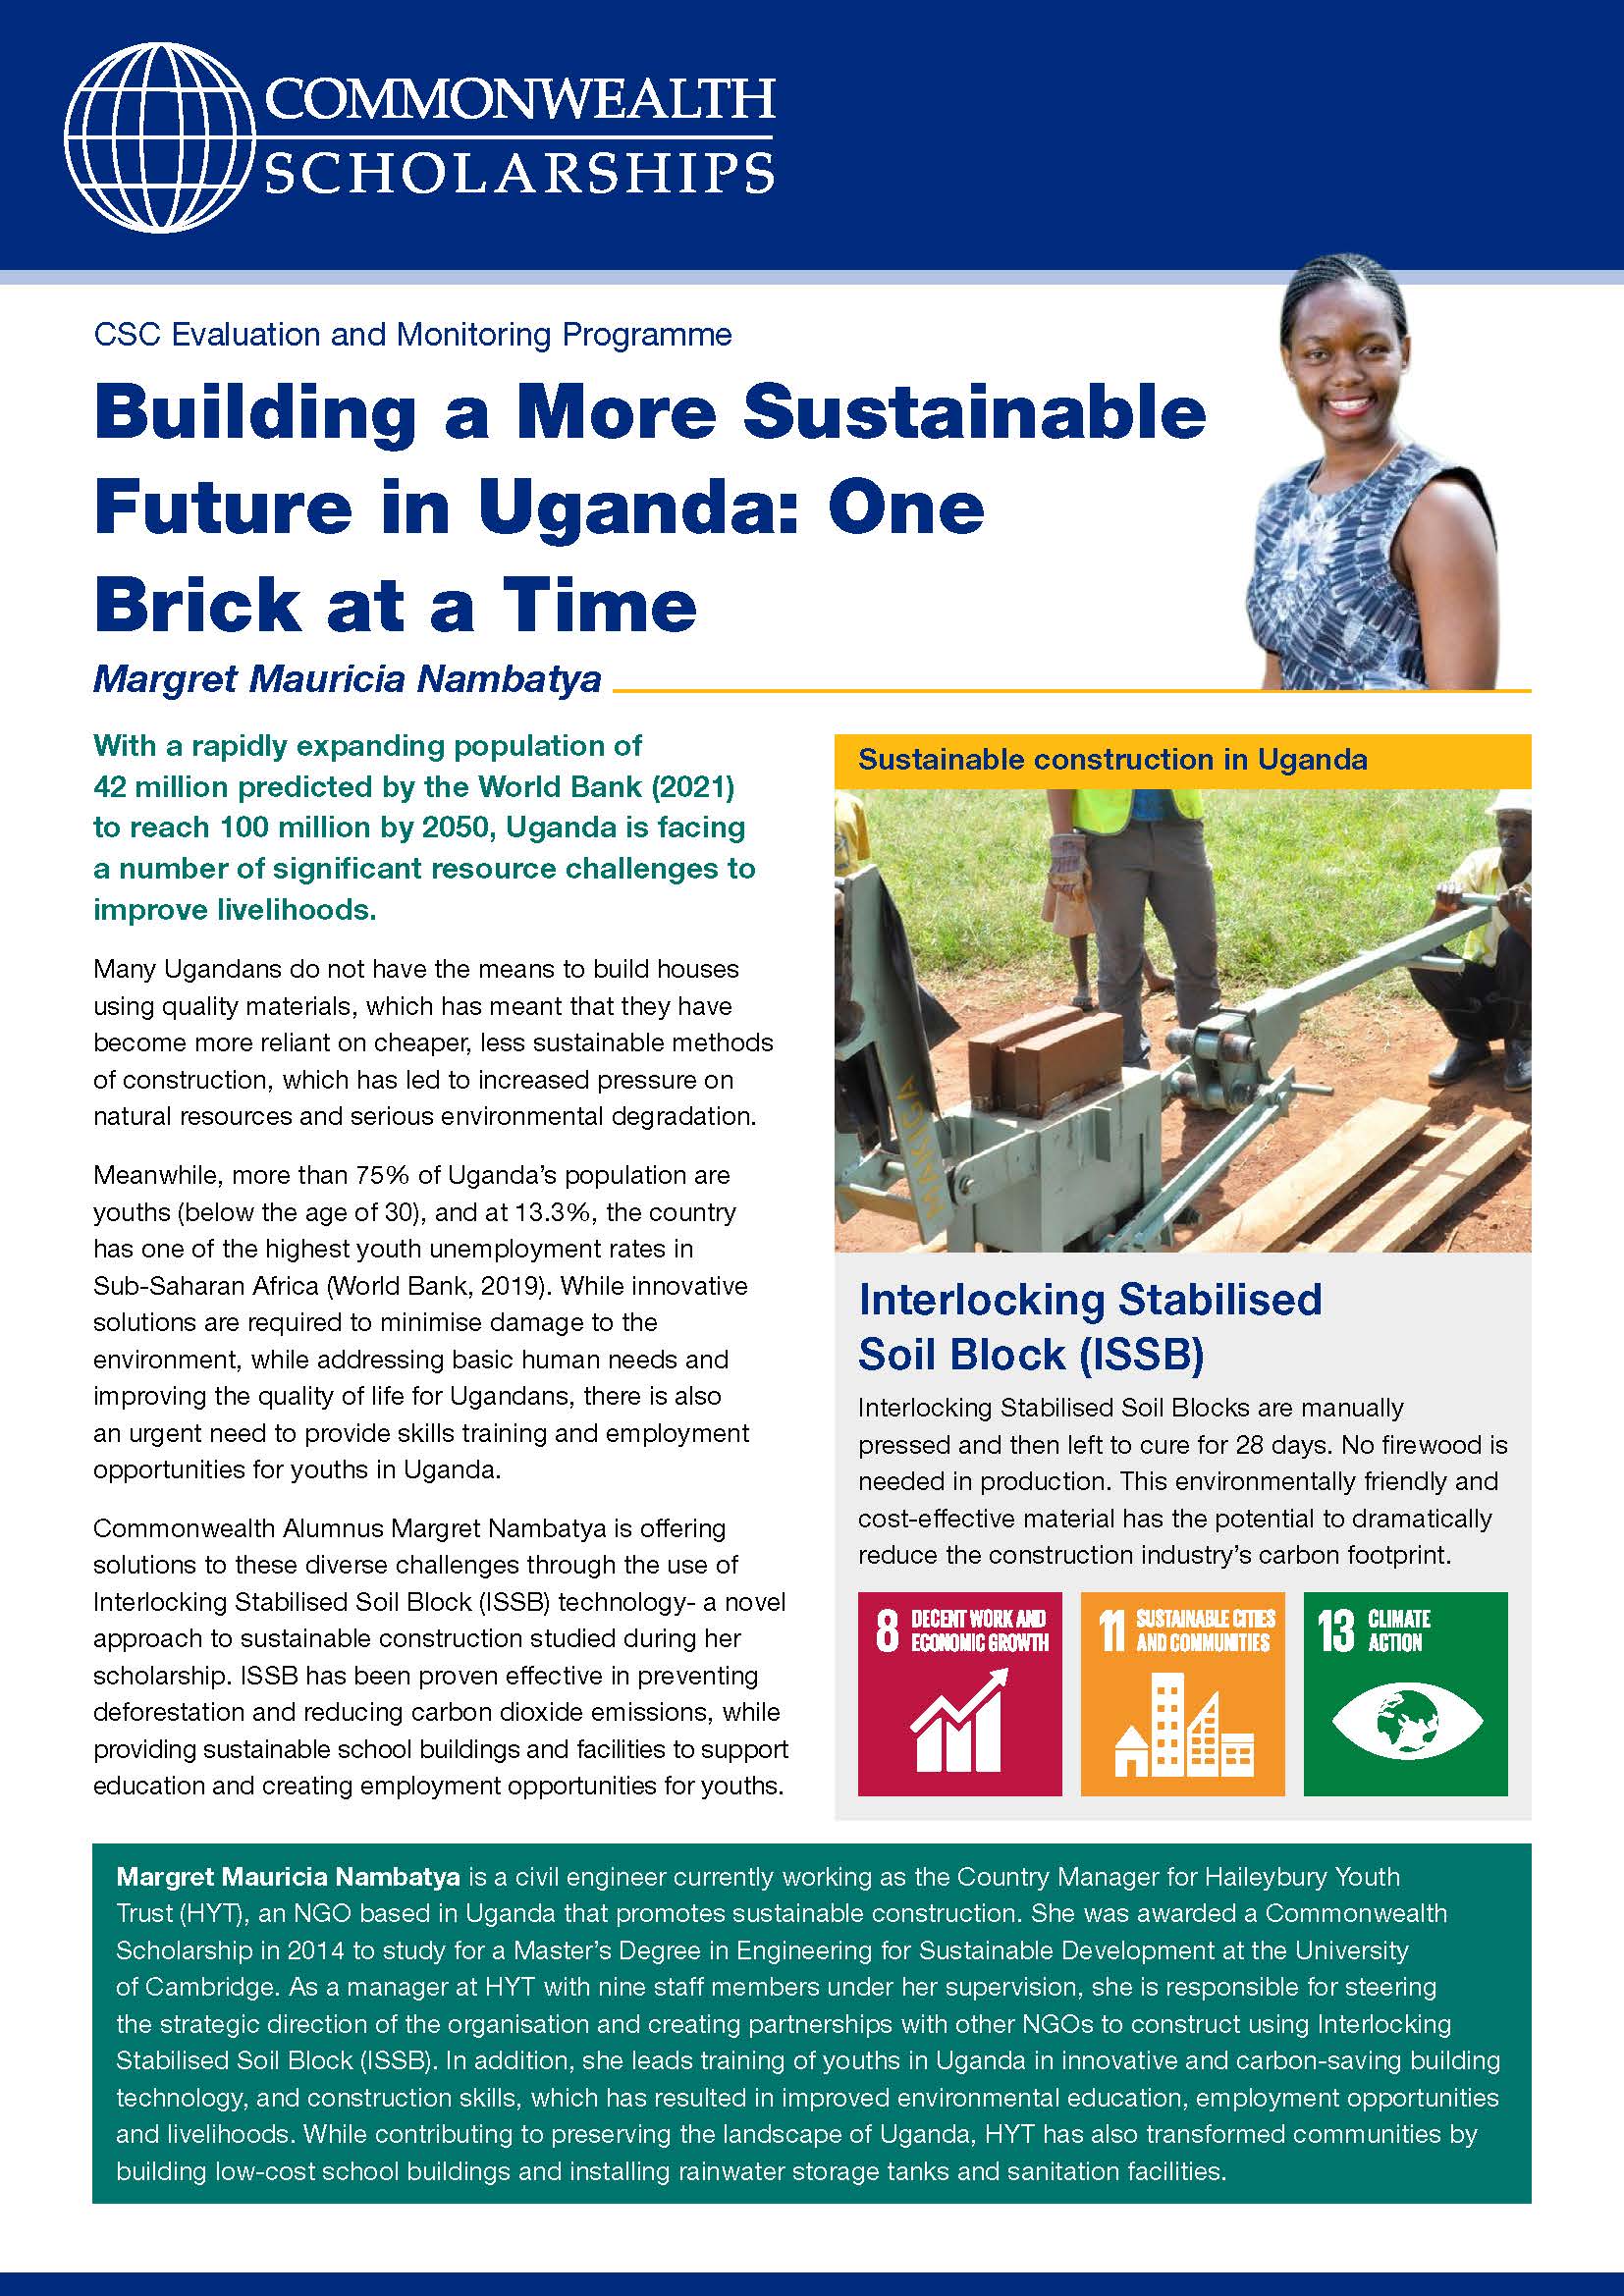 Read the Building a More Sustainable Future in Uganda: One Brick at a Time case study